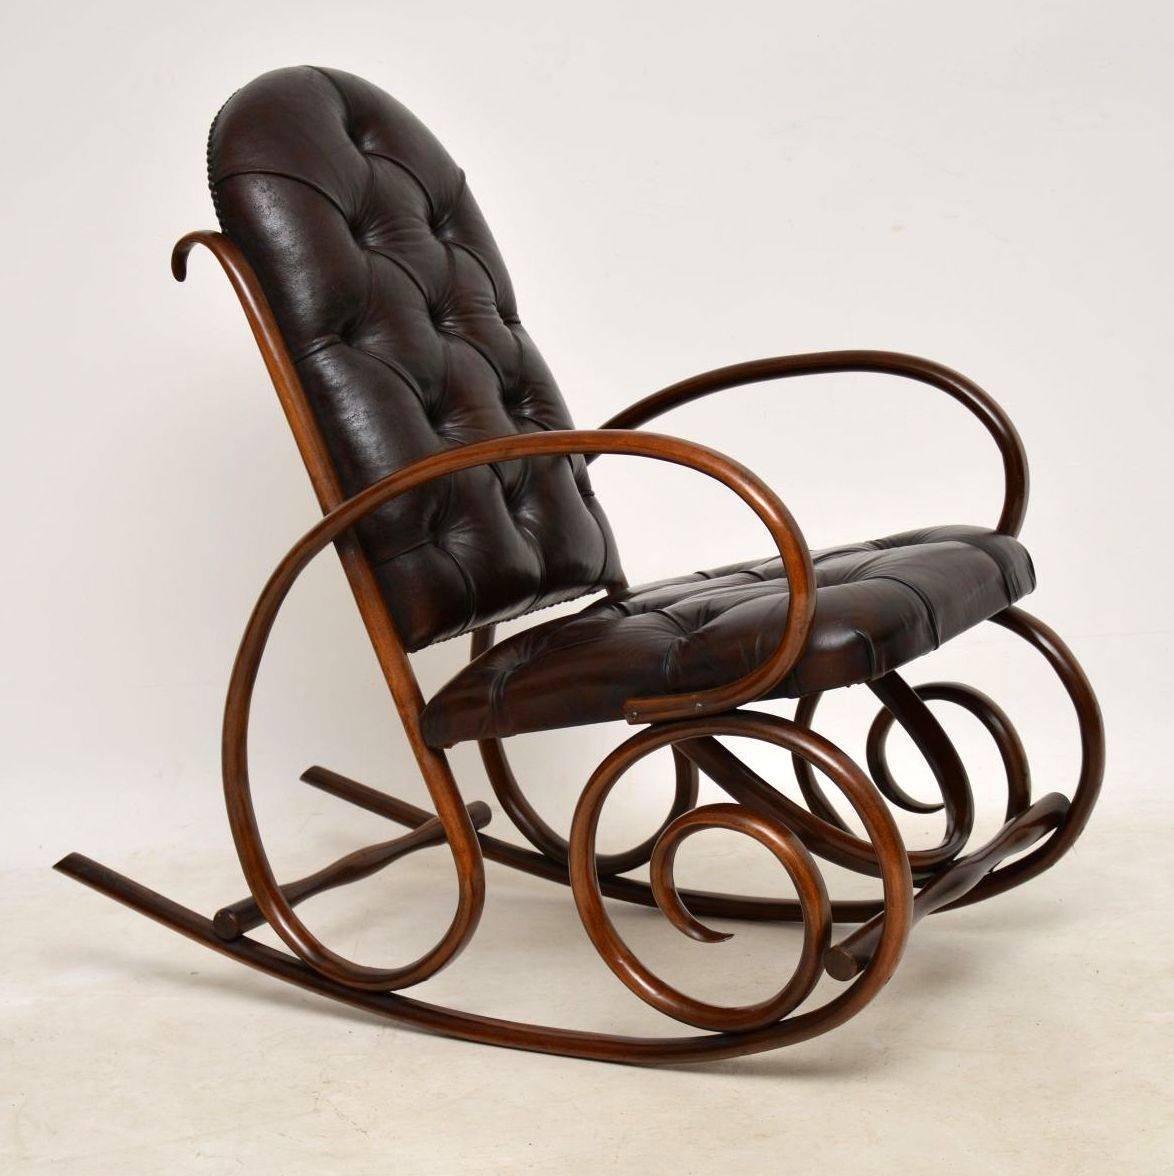 Original antique Victorian Thonet bentwood rocking chair upholstered in brown leather and in good condition. The back and seat are deep buttoned and the leather is in excellent original condition. We have just had it revived and polished. Originally